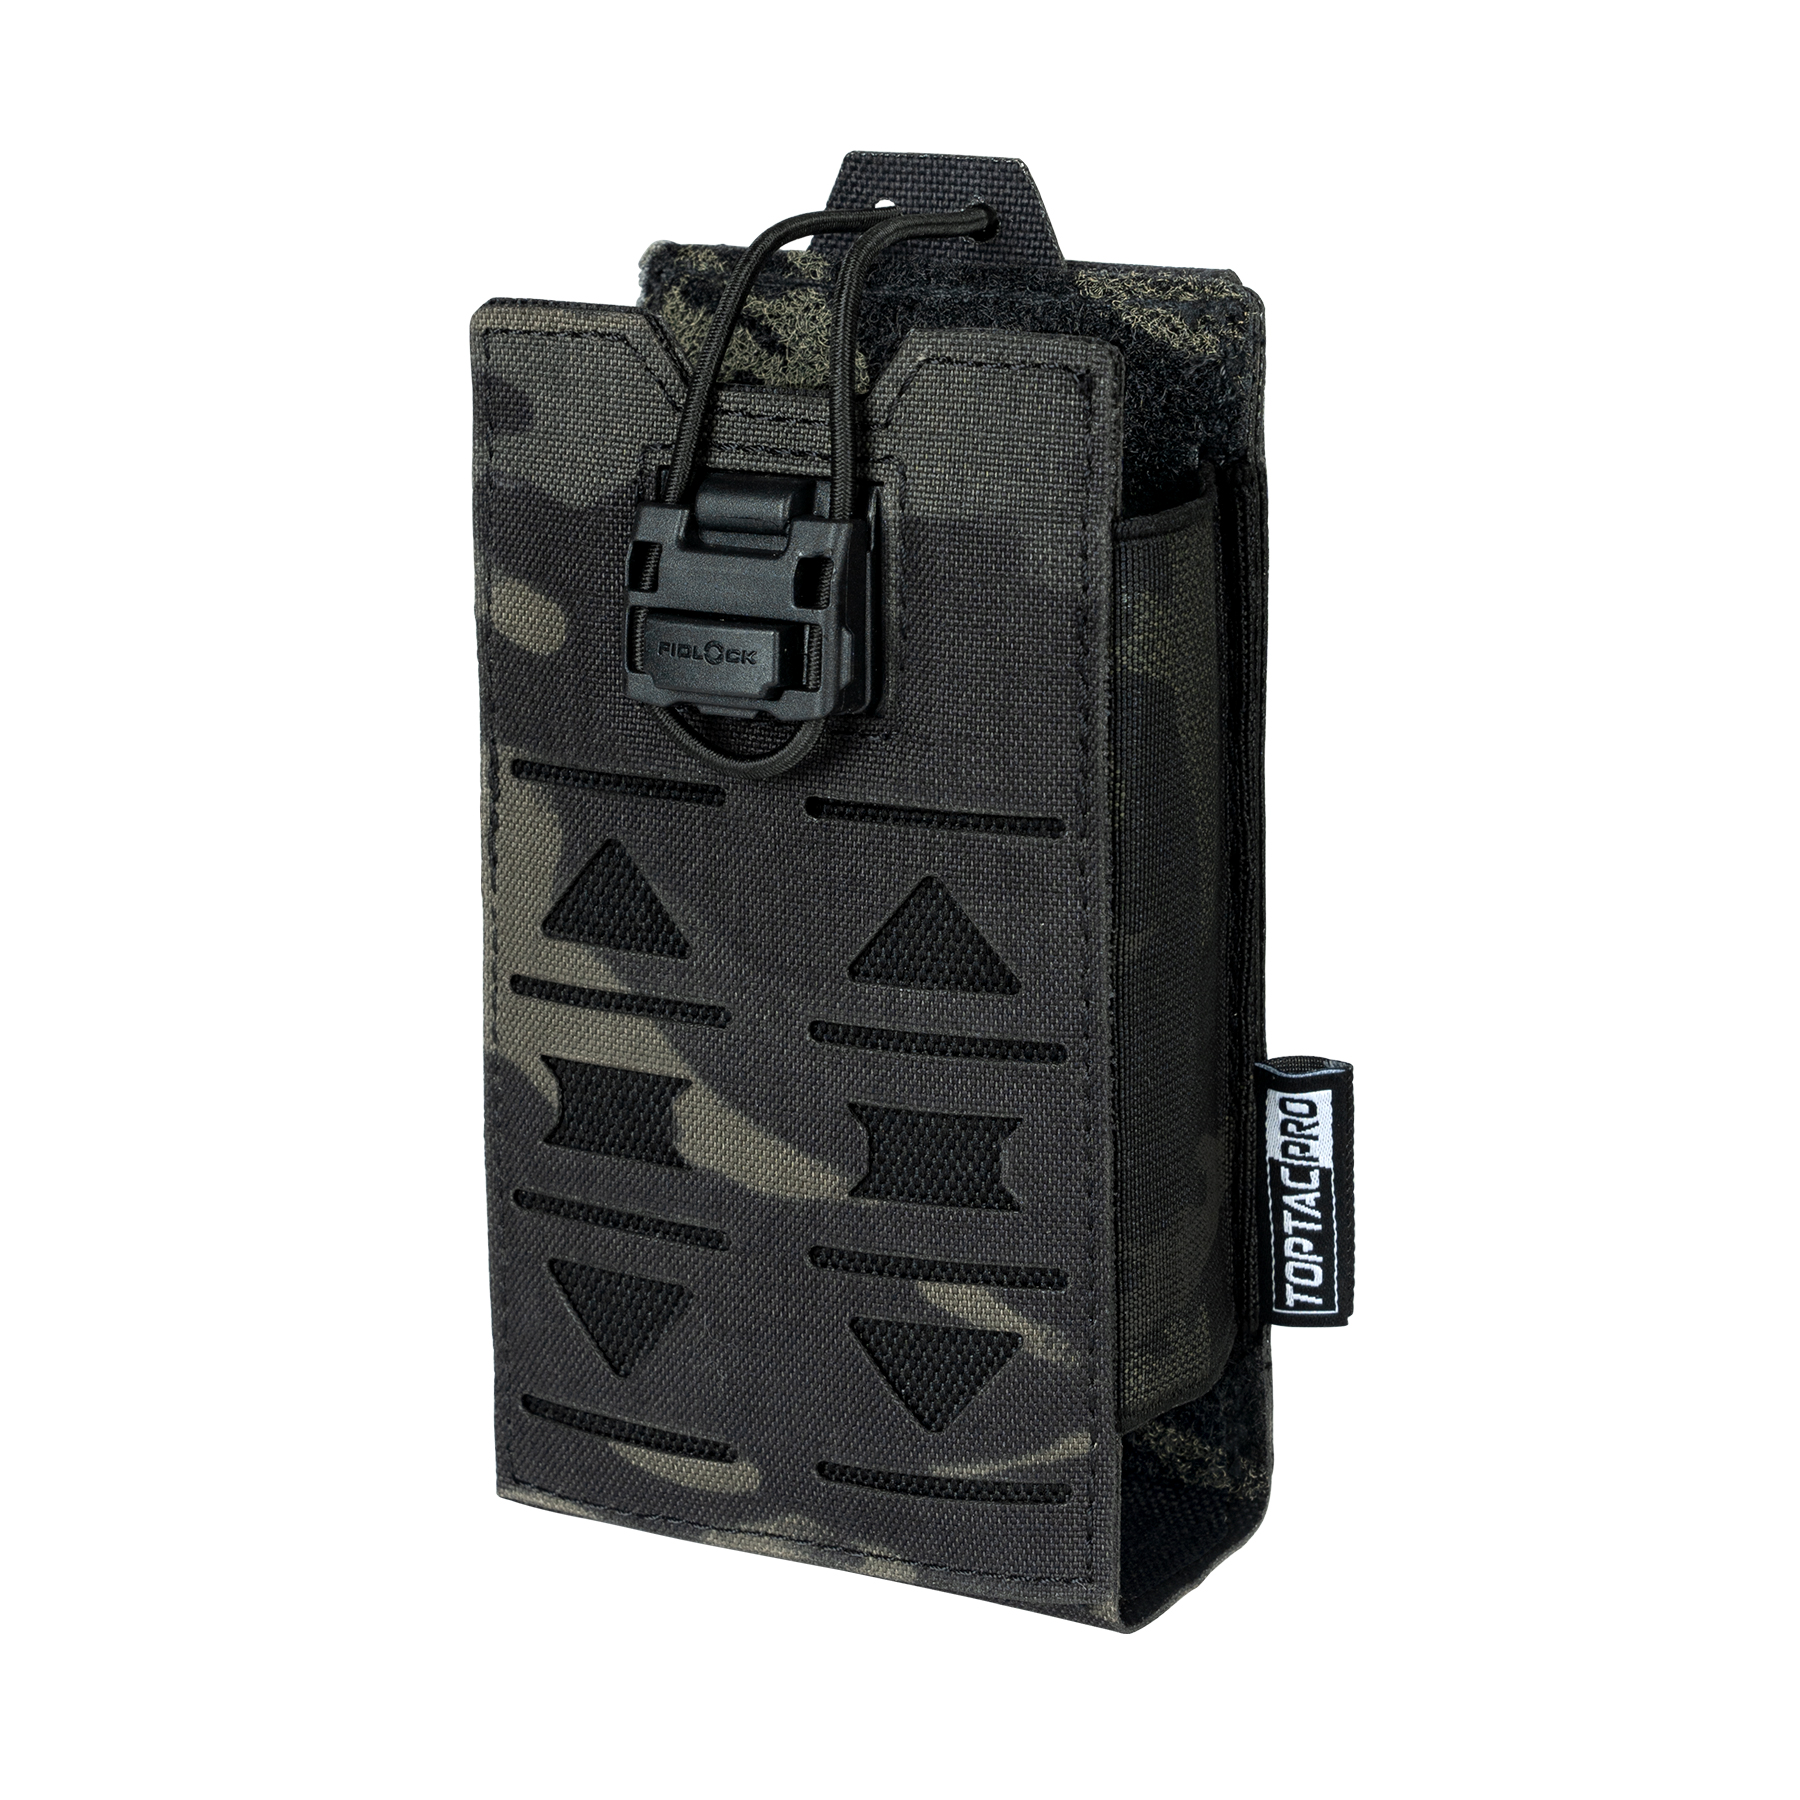 Porte talkie-walkie Molle WF Tactical – Action Airsoft